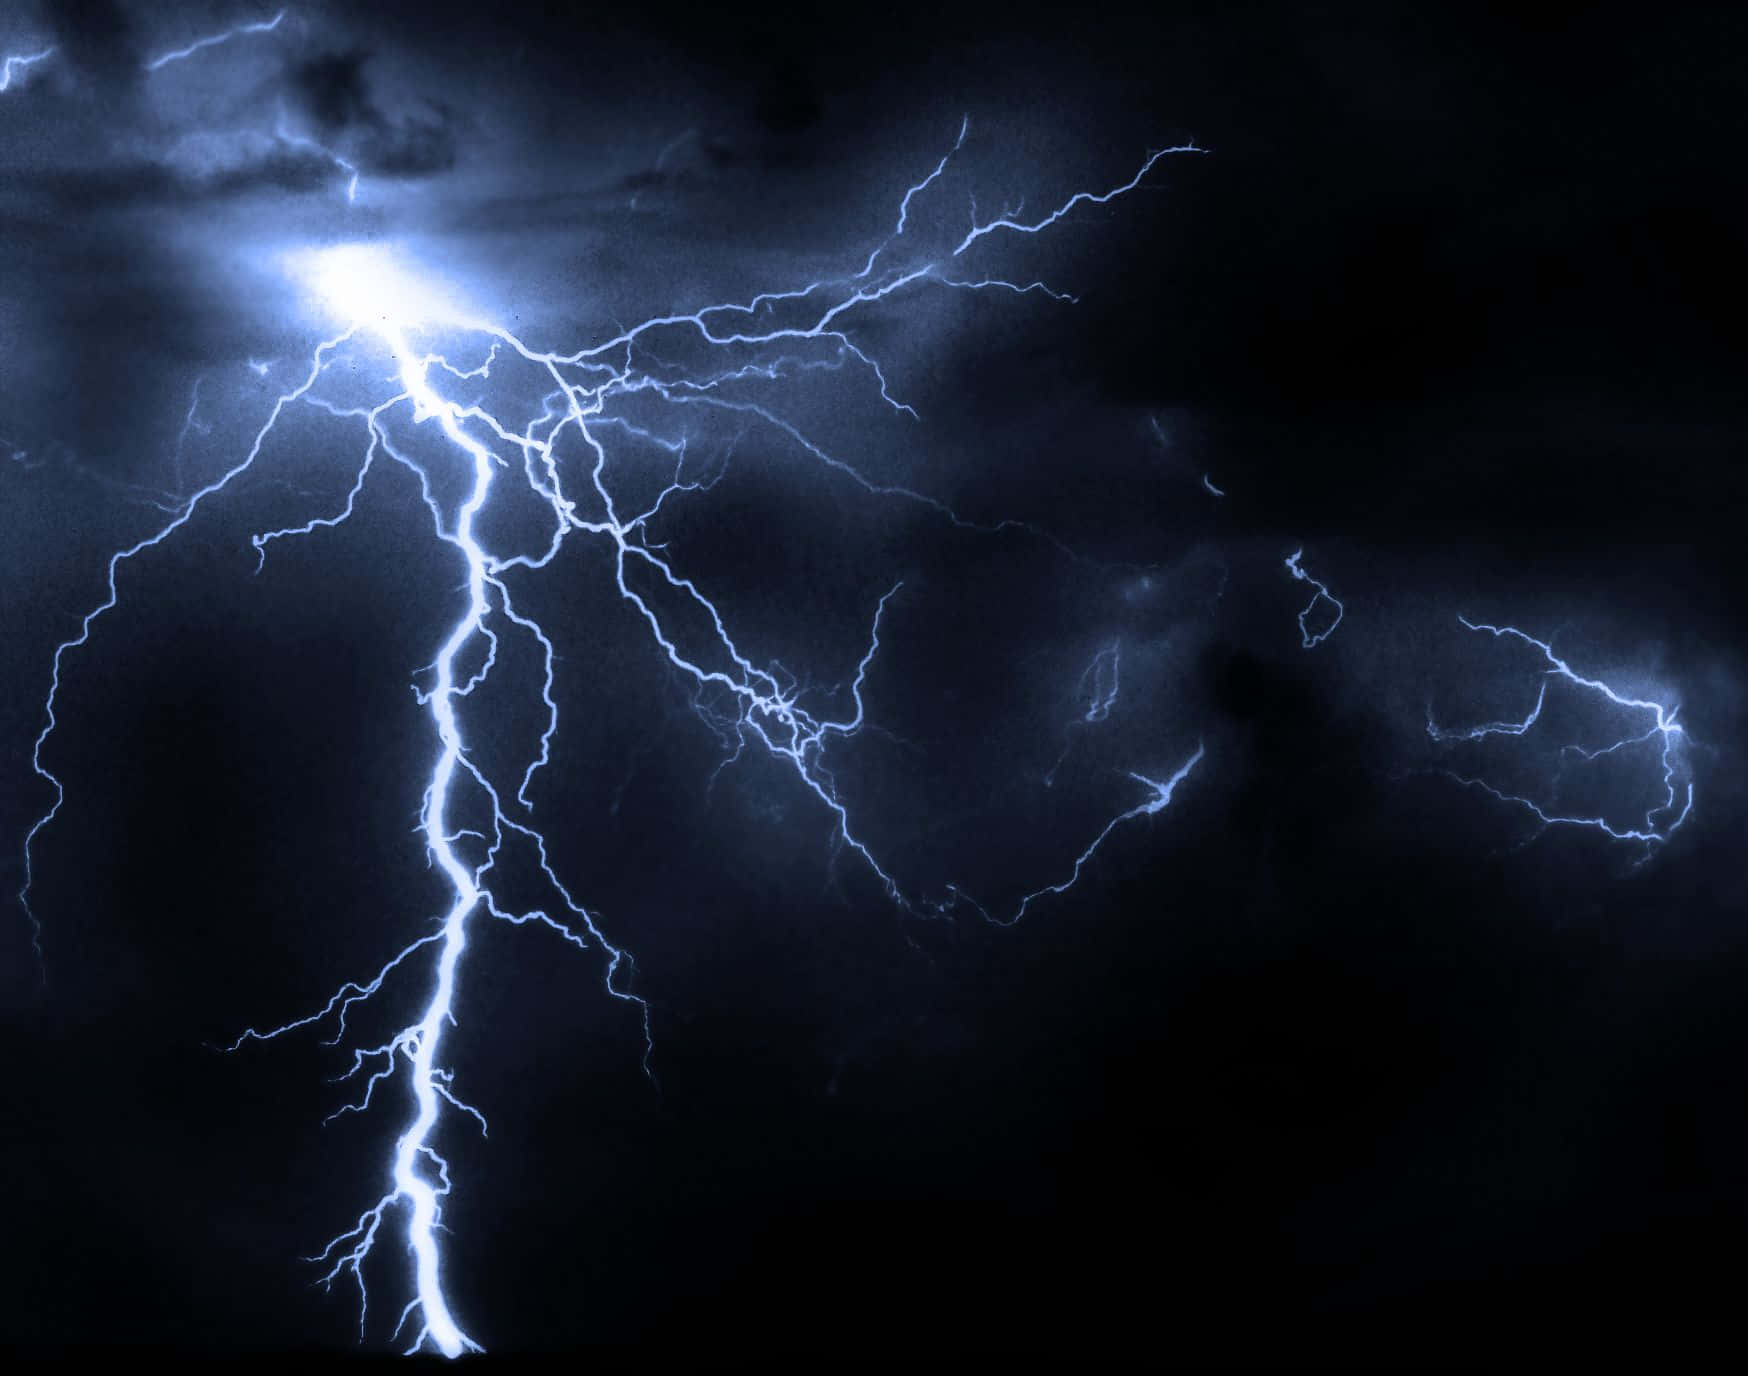 Electric Blues - A mesmerizing image of blue lightning in a dark night sky Wallpaper